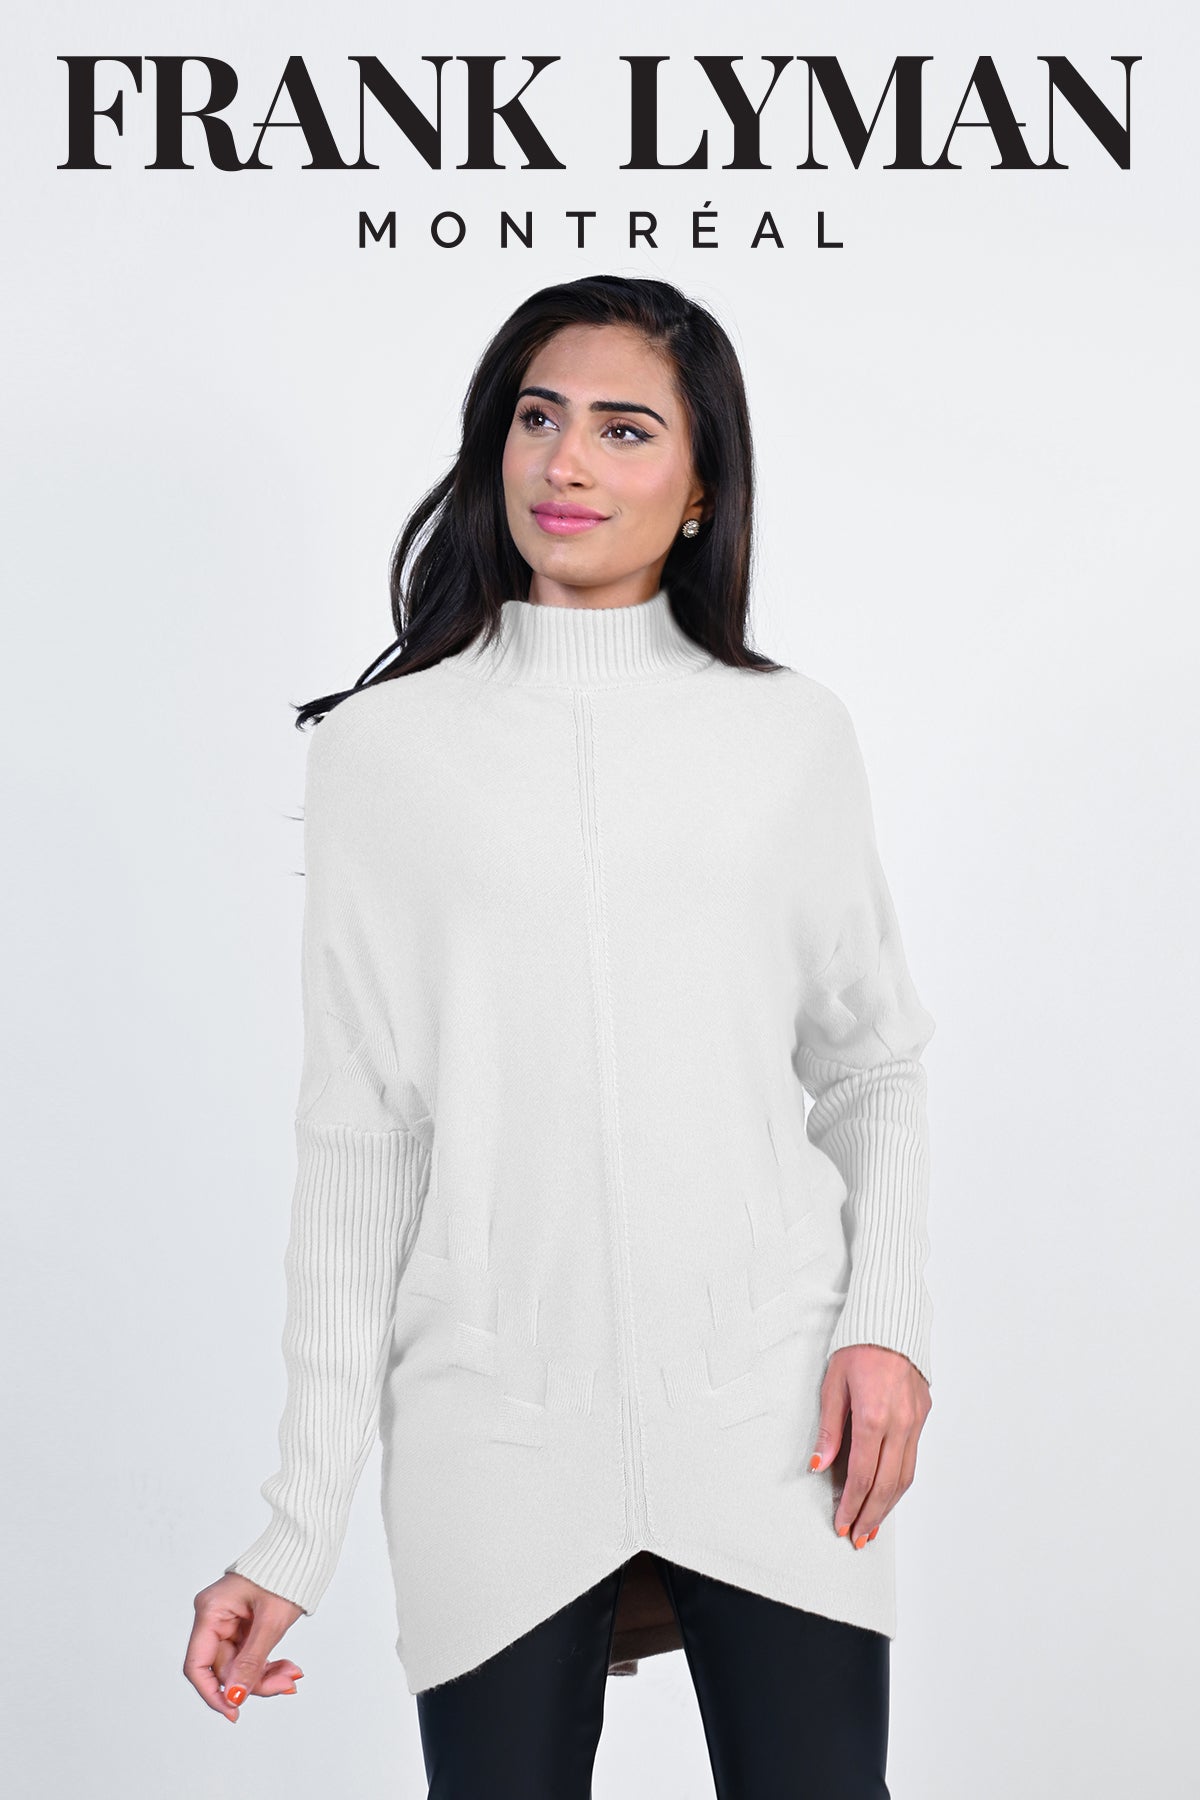 Frank Lyman Montreal Off white Sweater-Buy Frank Lyman Montreal Sweaters Online-Frank Lyman Montreal Online Sweater Shop